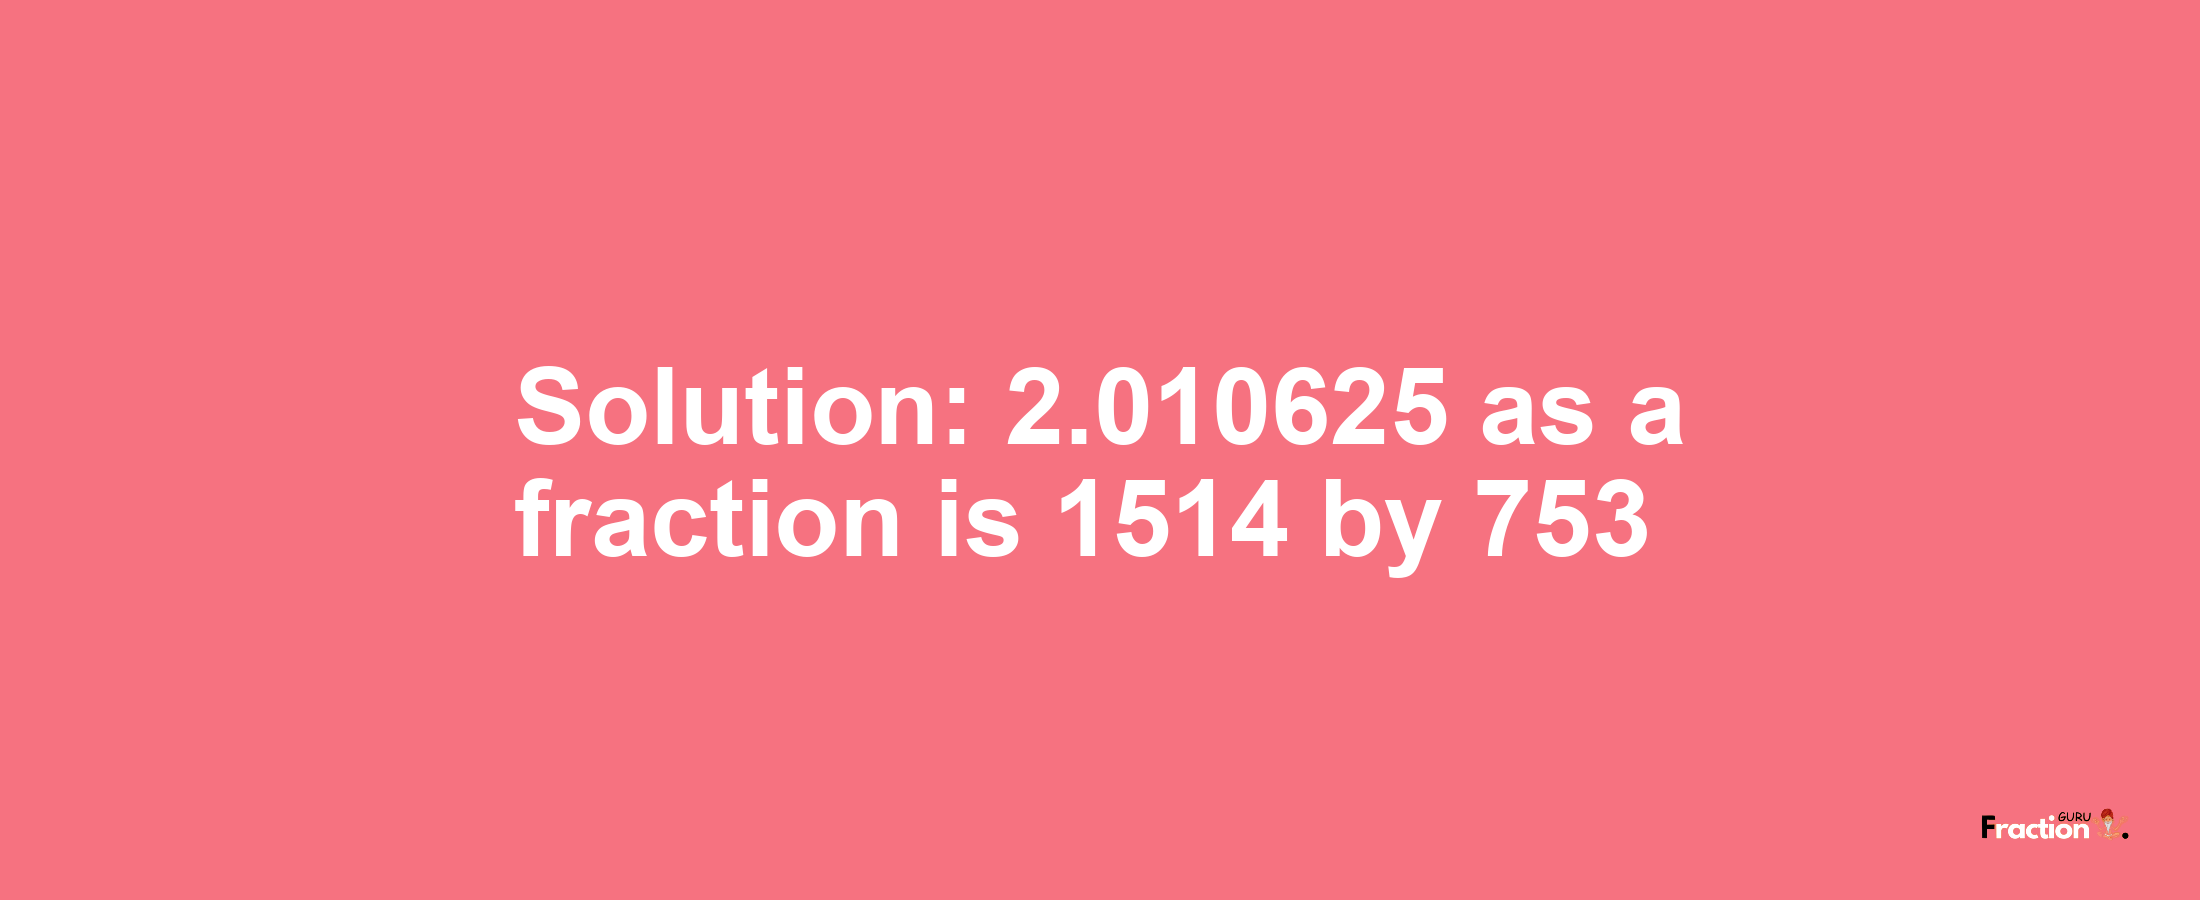 Solution:2.010625 as a fraction is 1514/753